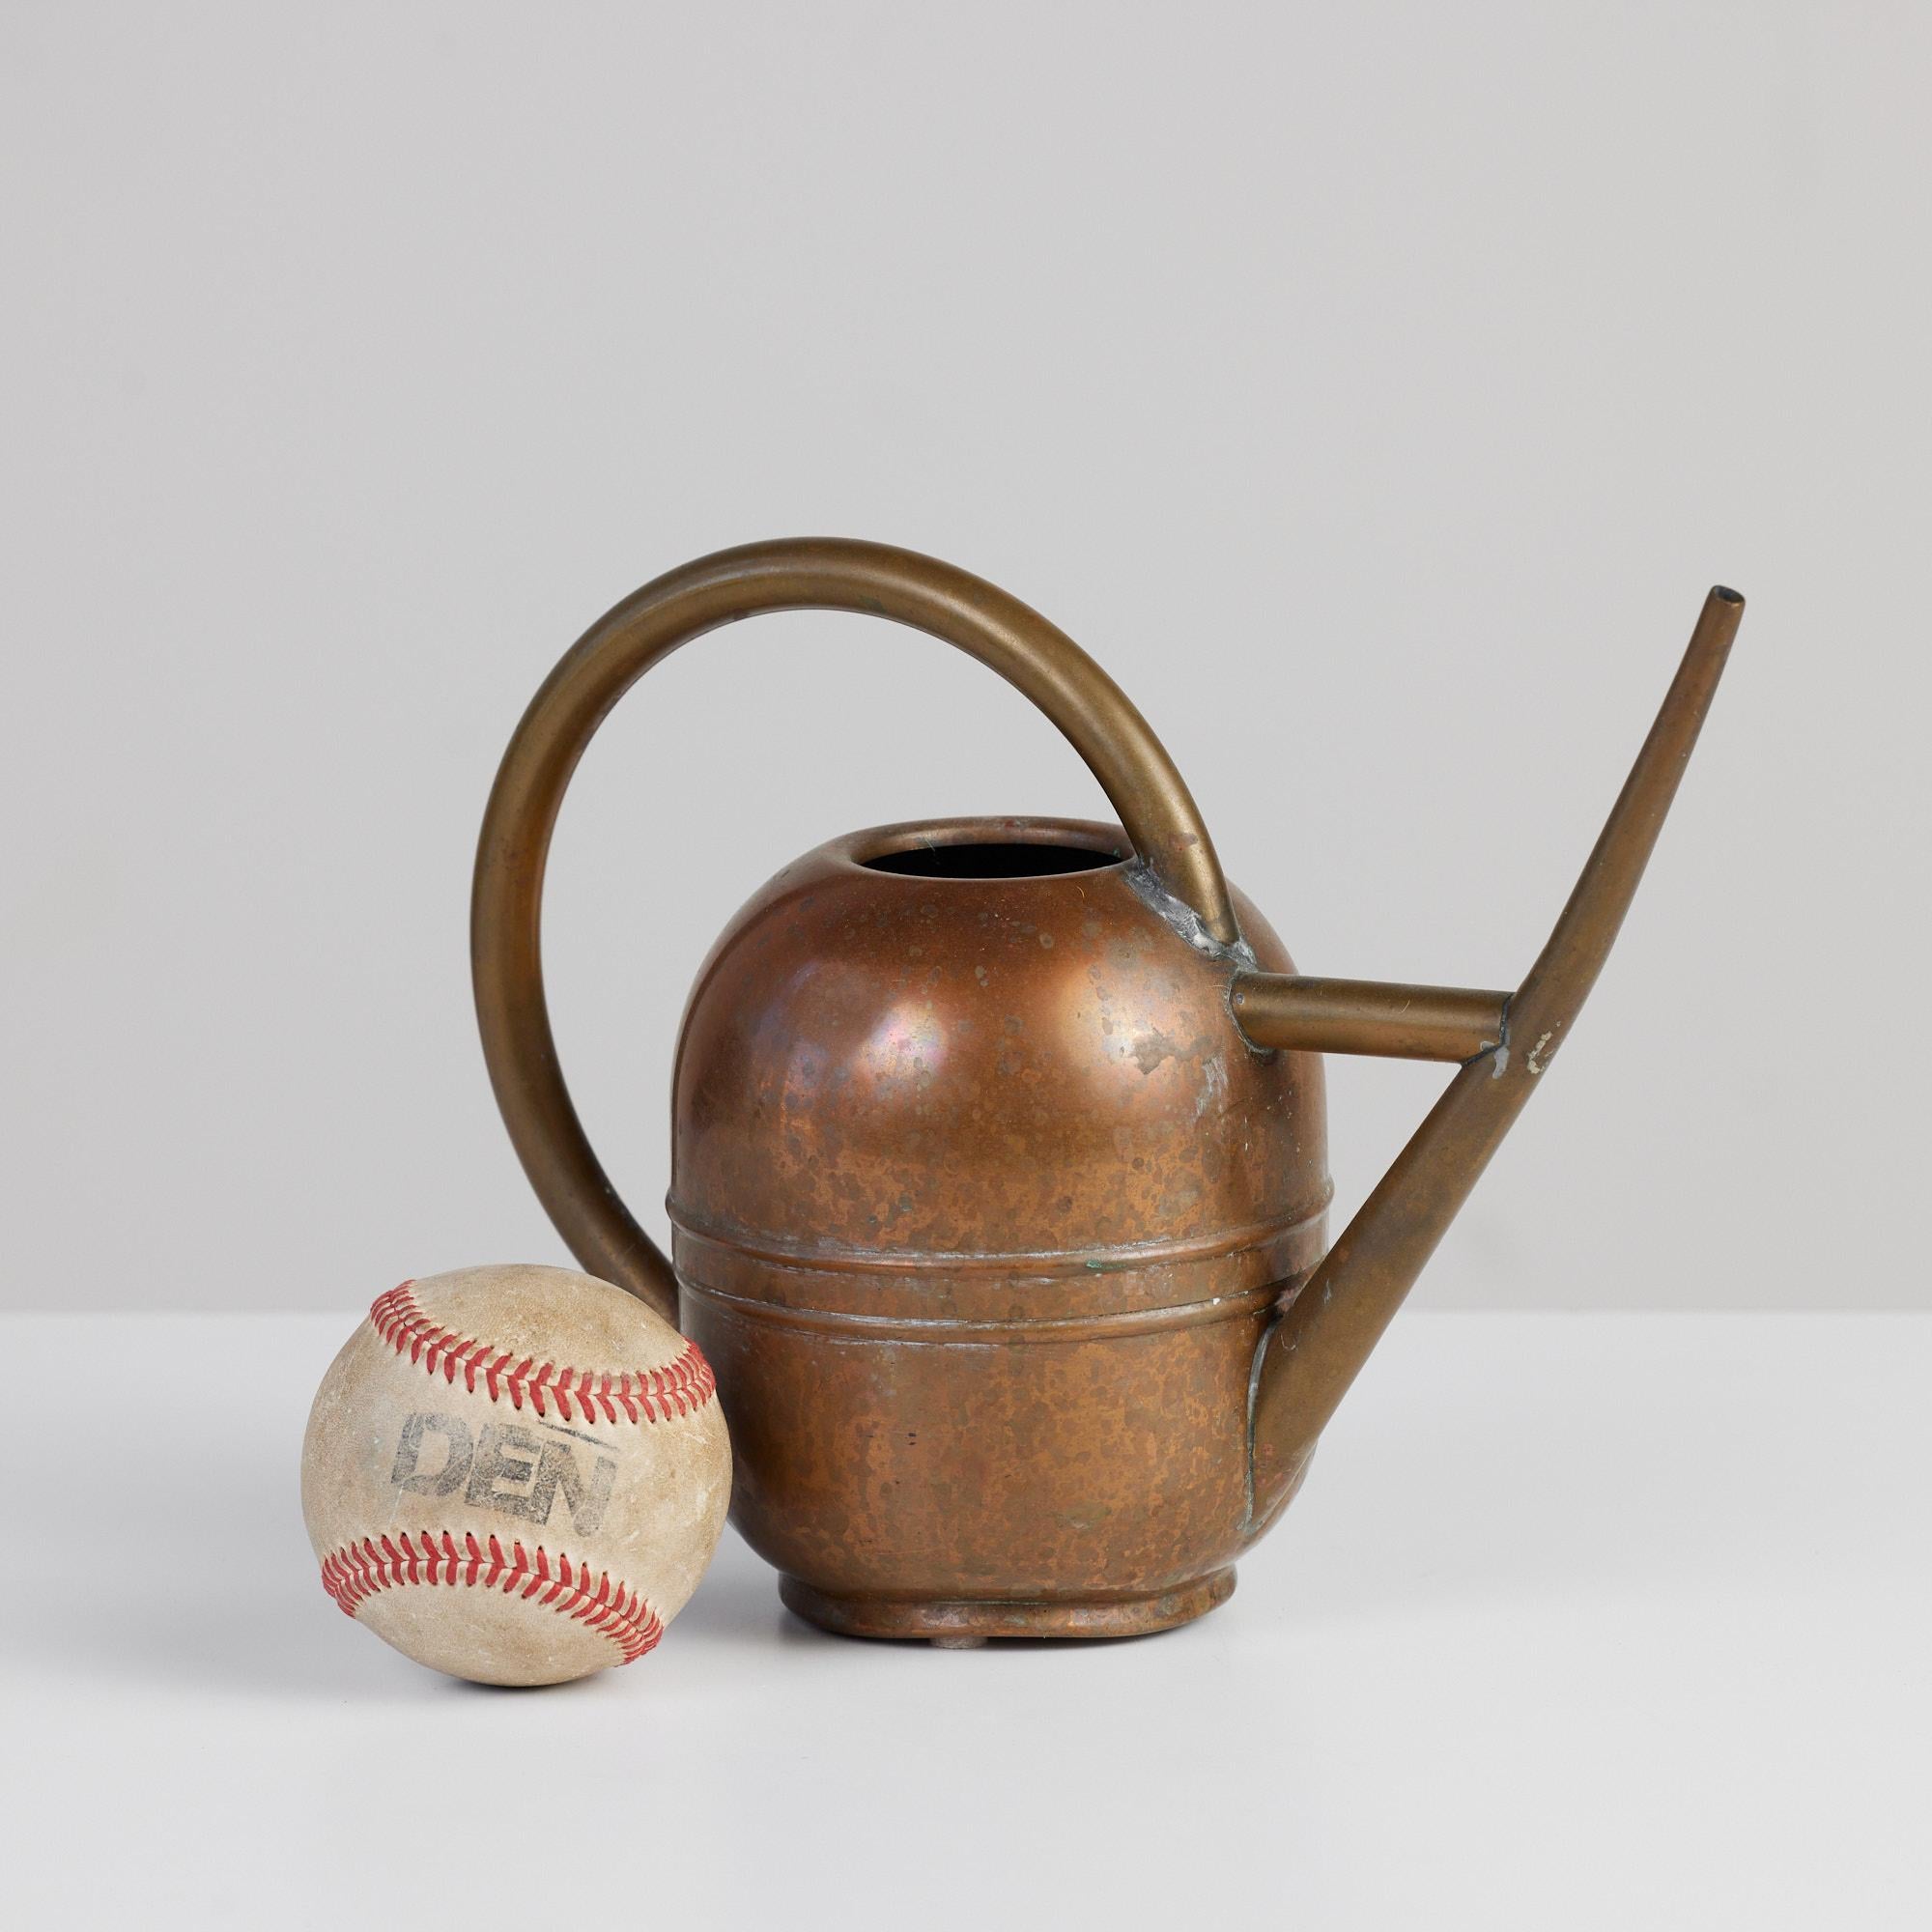 Art Deco copper and brass watering can c.1930's, Chase USA. This piece features a copper body and brass handle and spout. Vessel is impressed with [Chase USA] and feature the Chase Minotaur Archer logo on the underside.

The Chase Brass and Copper